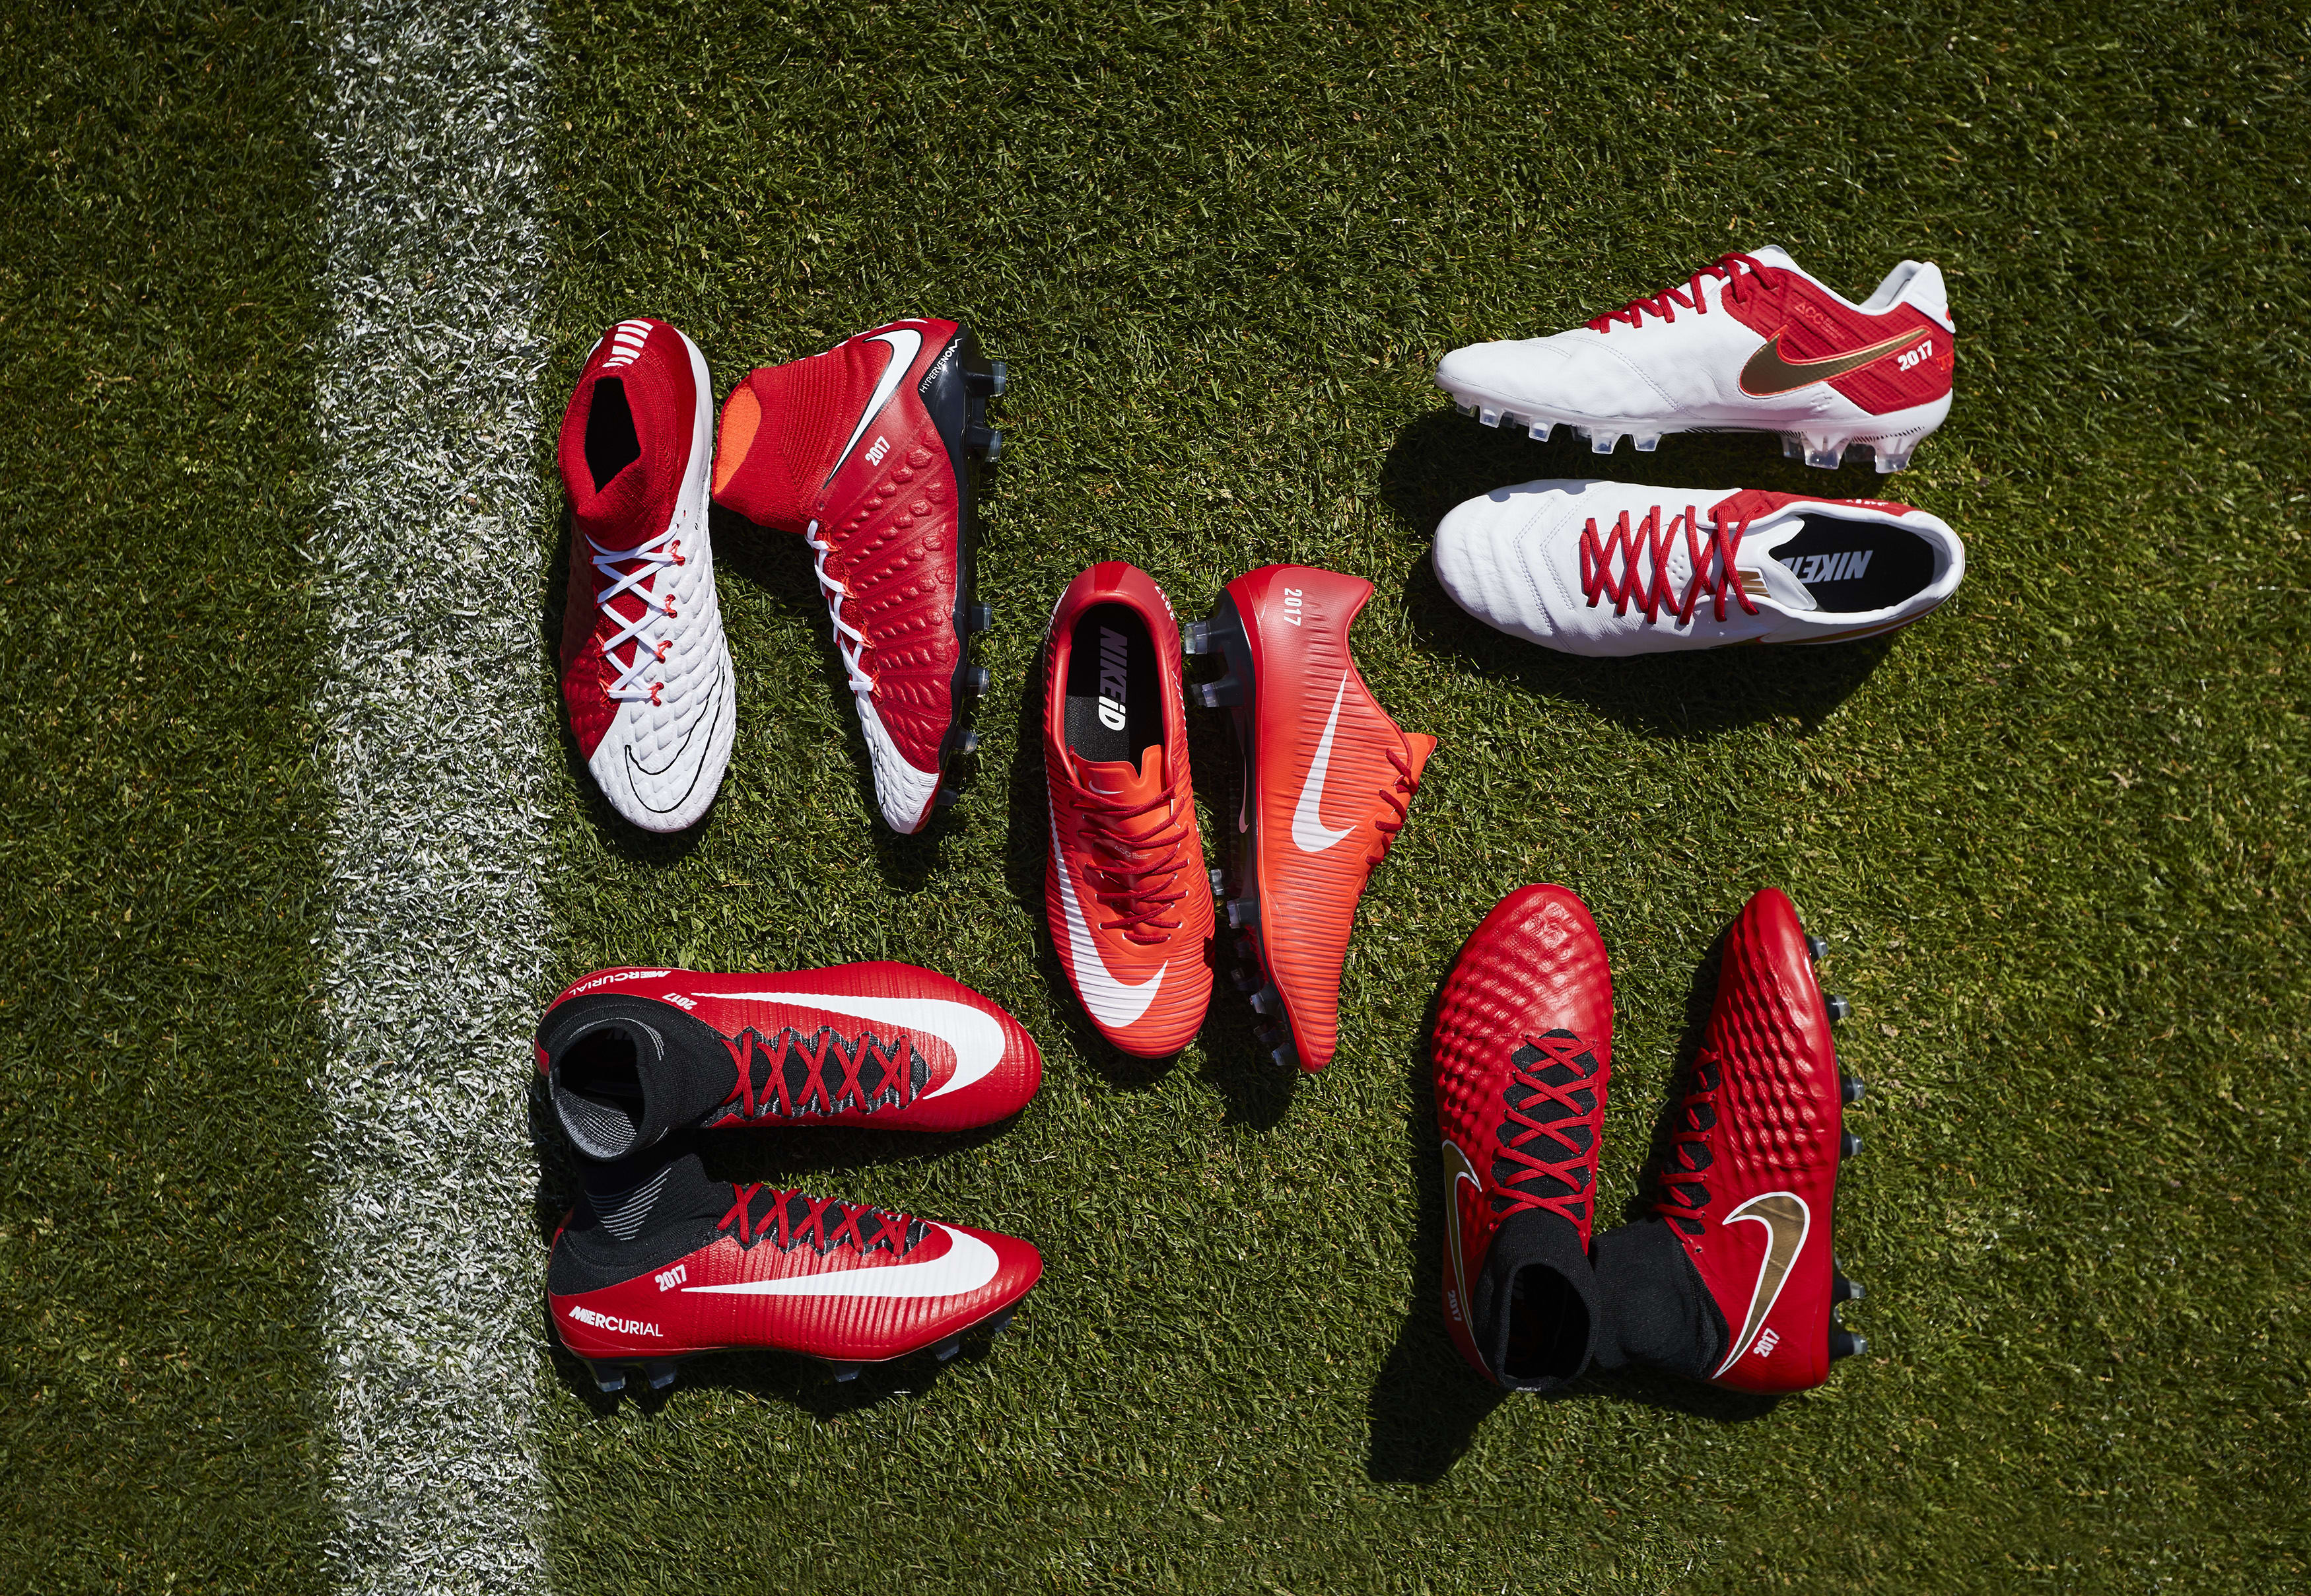 Nike Just Gave AS Monaco Sensation Kylian Mbappé His First Pair of ...